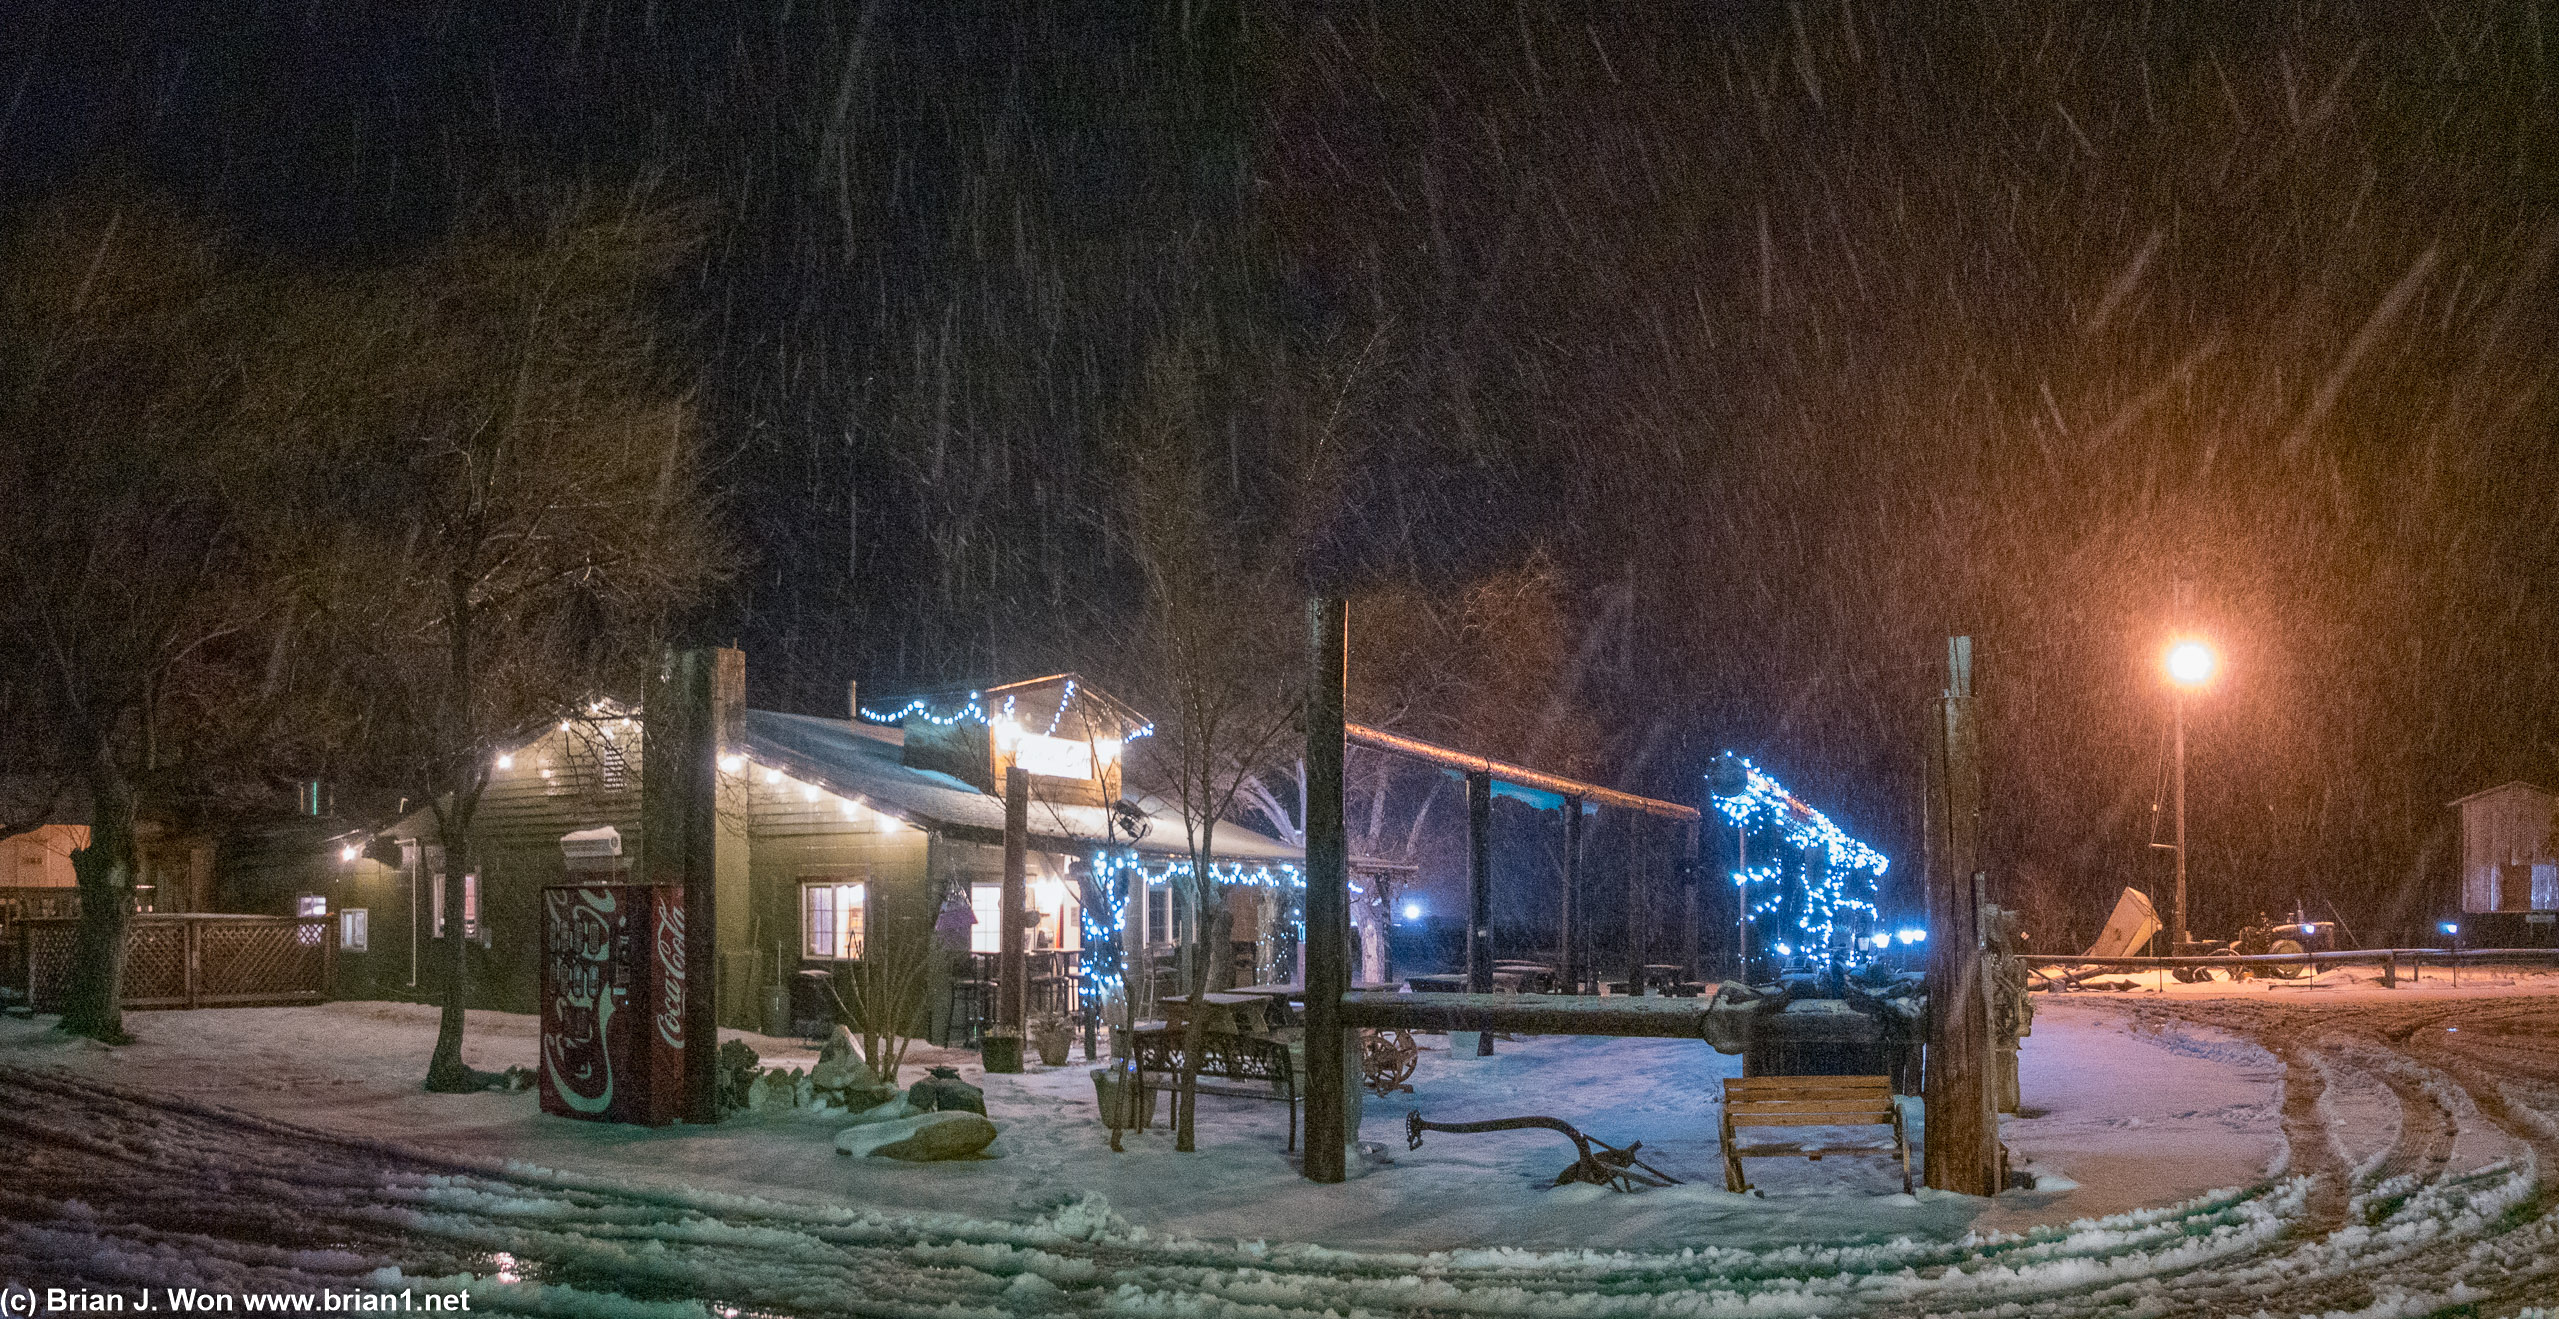 The main building of the RV park and motel bathed in snow and colorful lights.